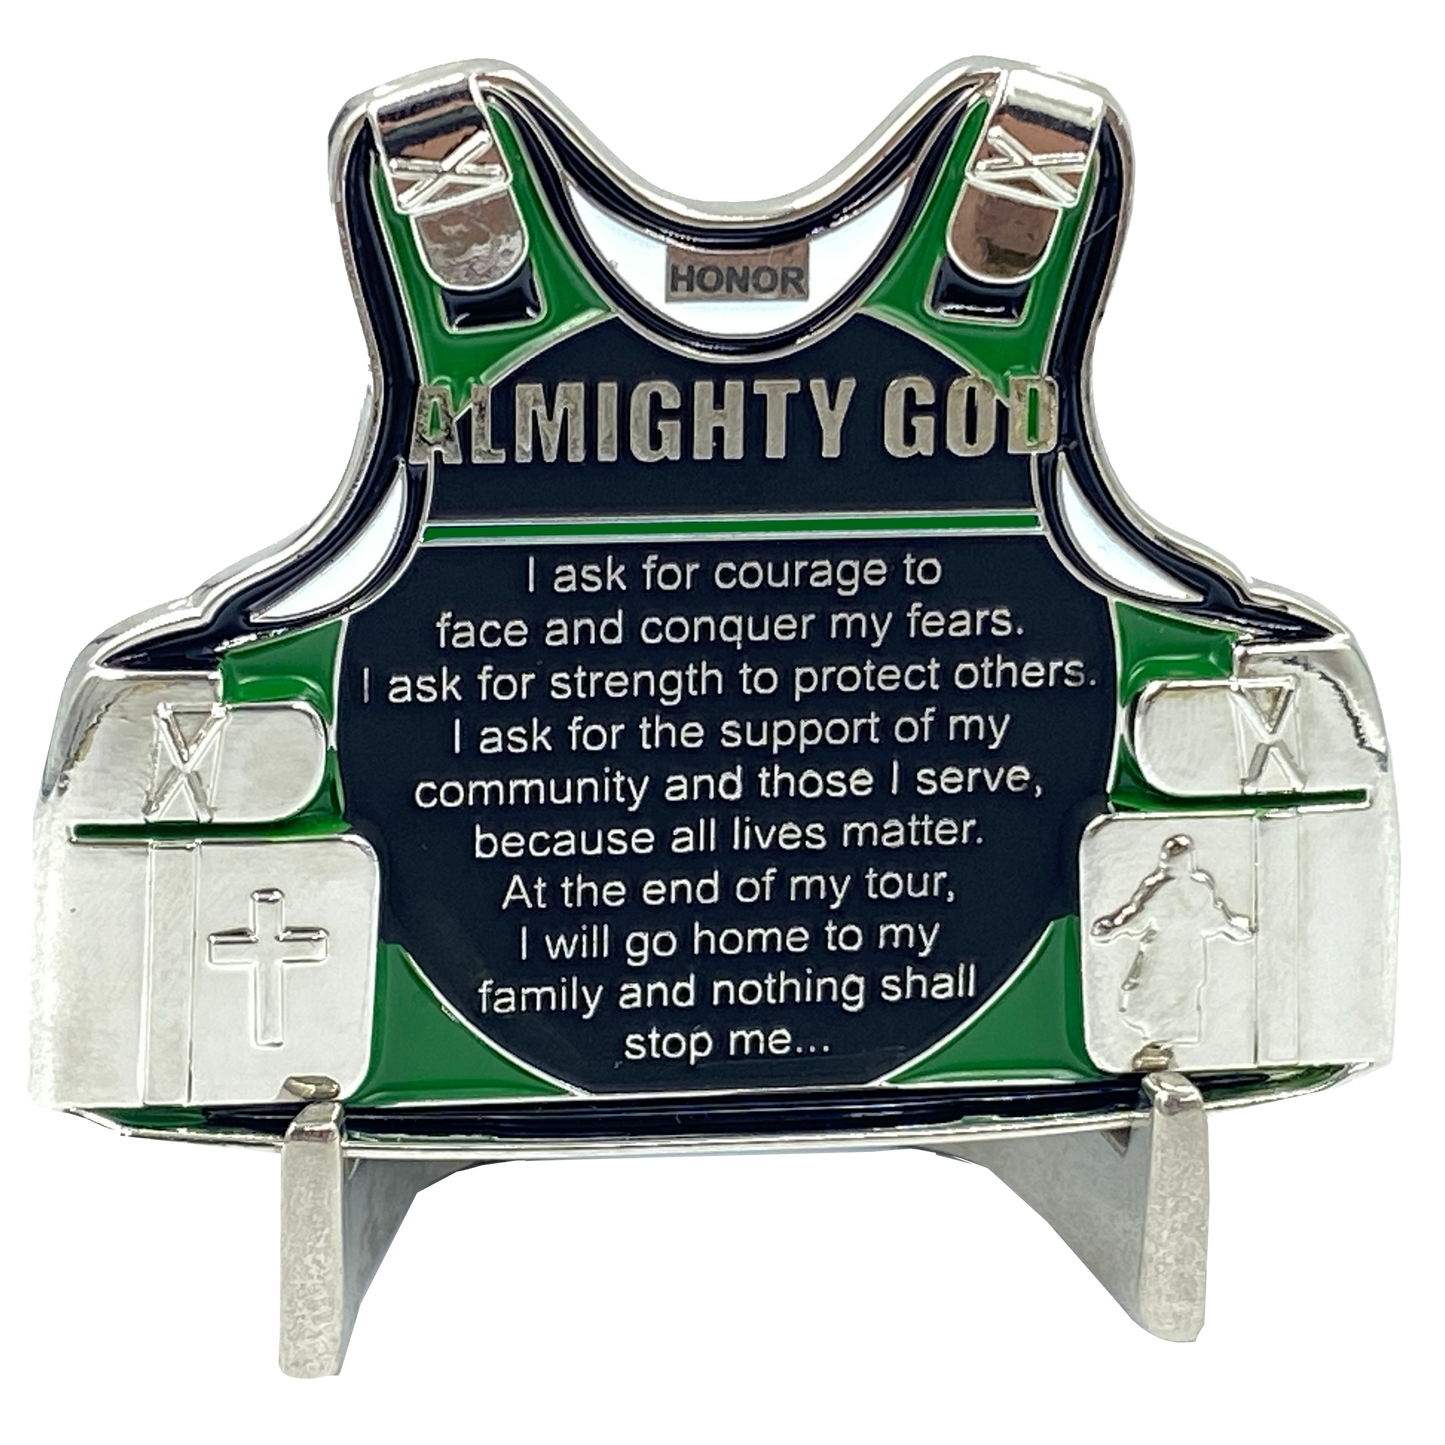 J-004 Police Officer's Prayer God Almighty Challenge Coin Thin Green Line Tactical Body Armor Border Patrol Marines Army Deputy Sheriff